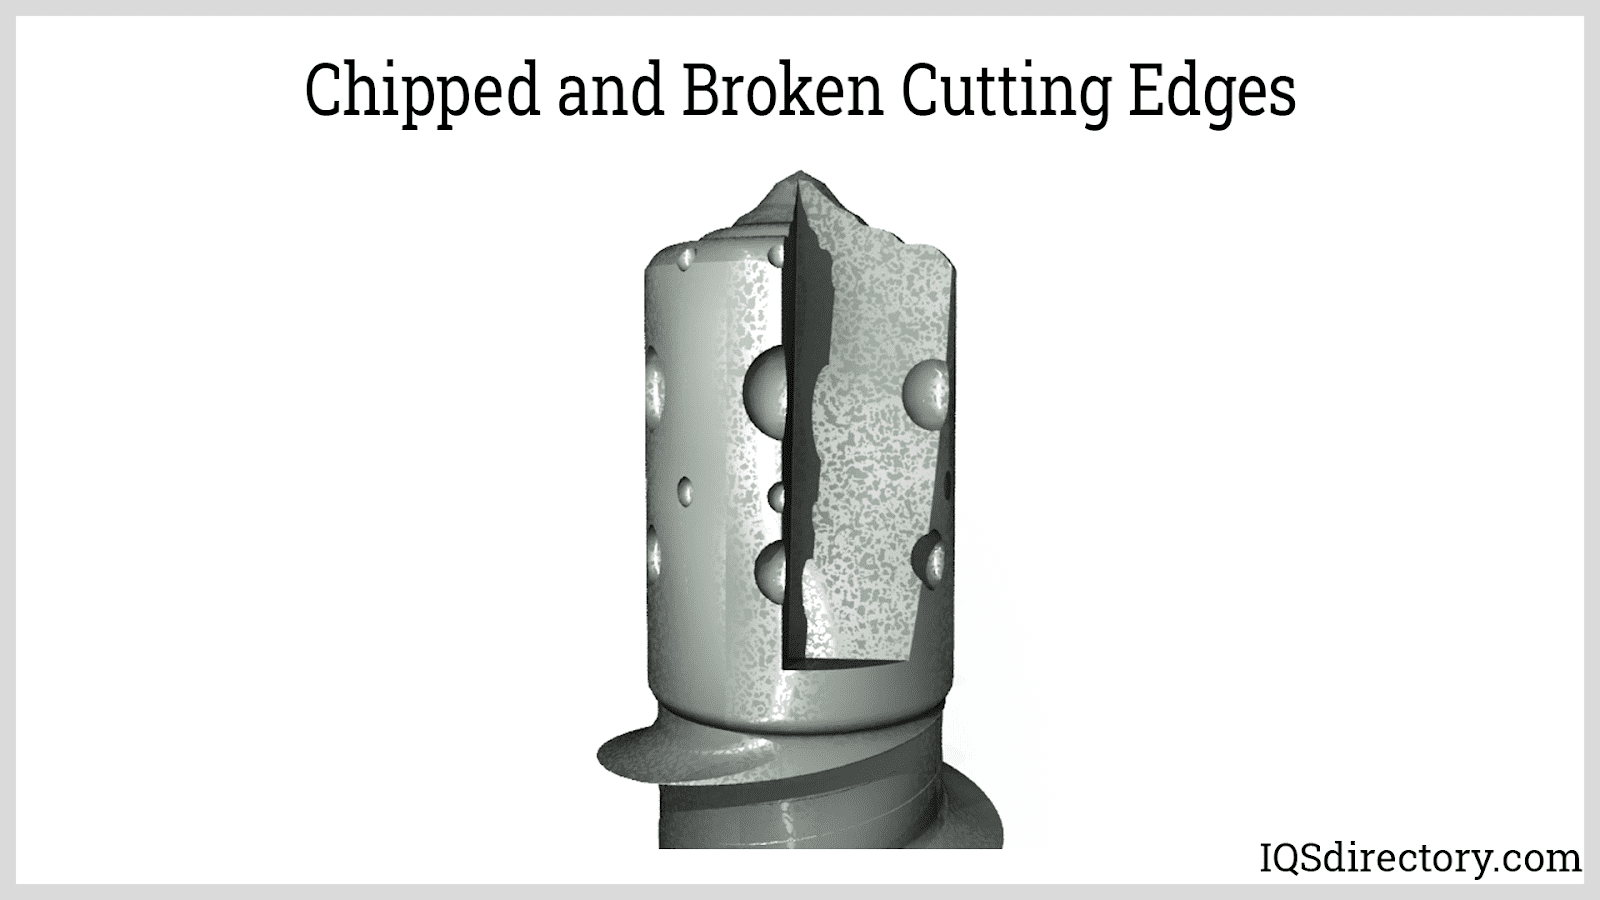 Chipped and Broken Cutting Edges